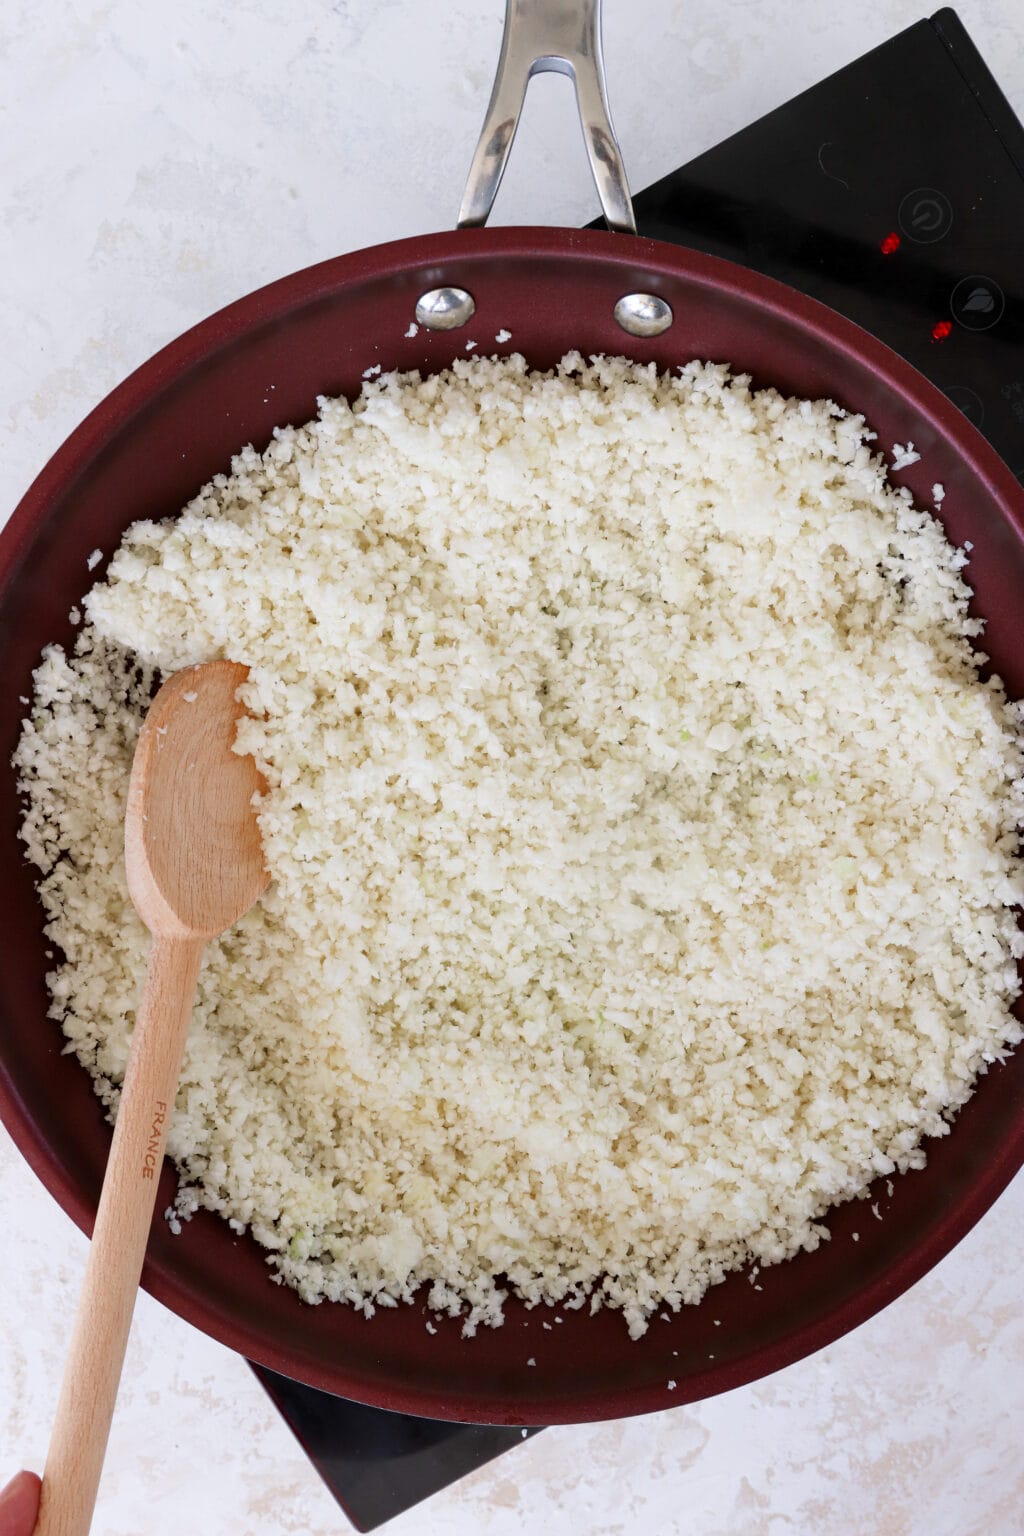 A red frying pan is fulled with riced cauliflower and bring stirred by a wooden spoon
